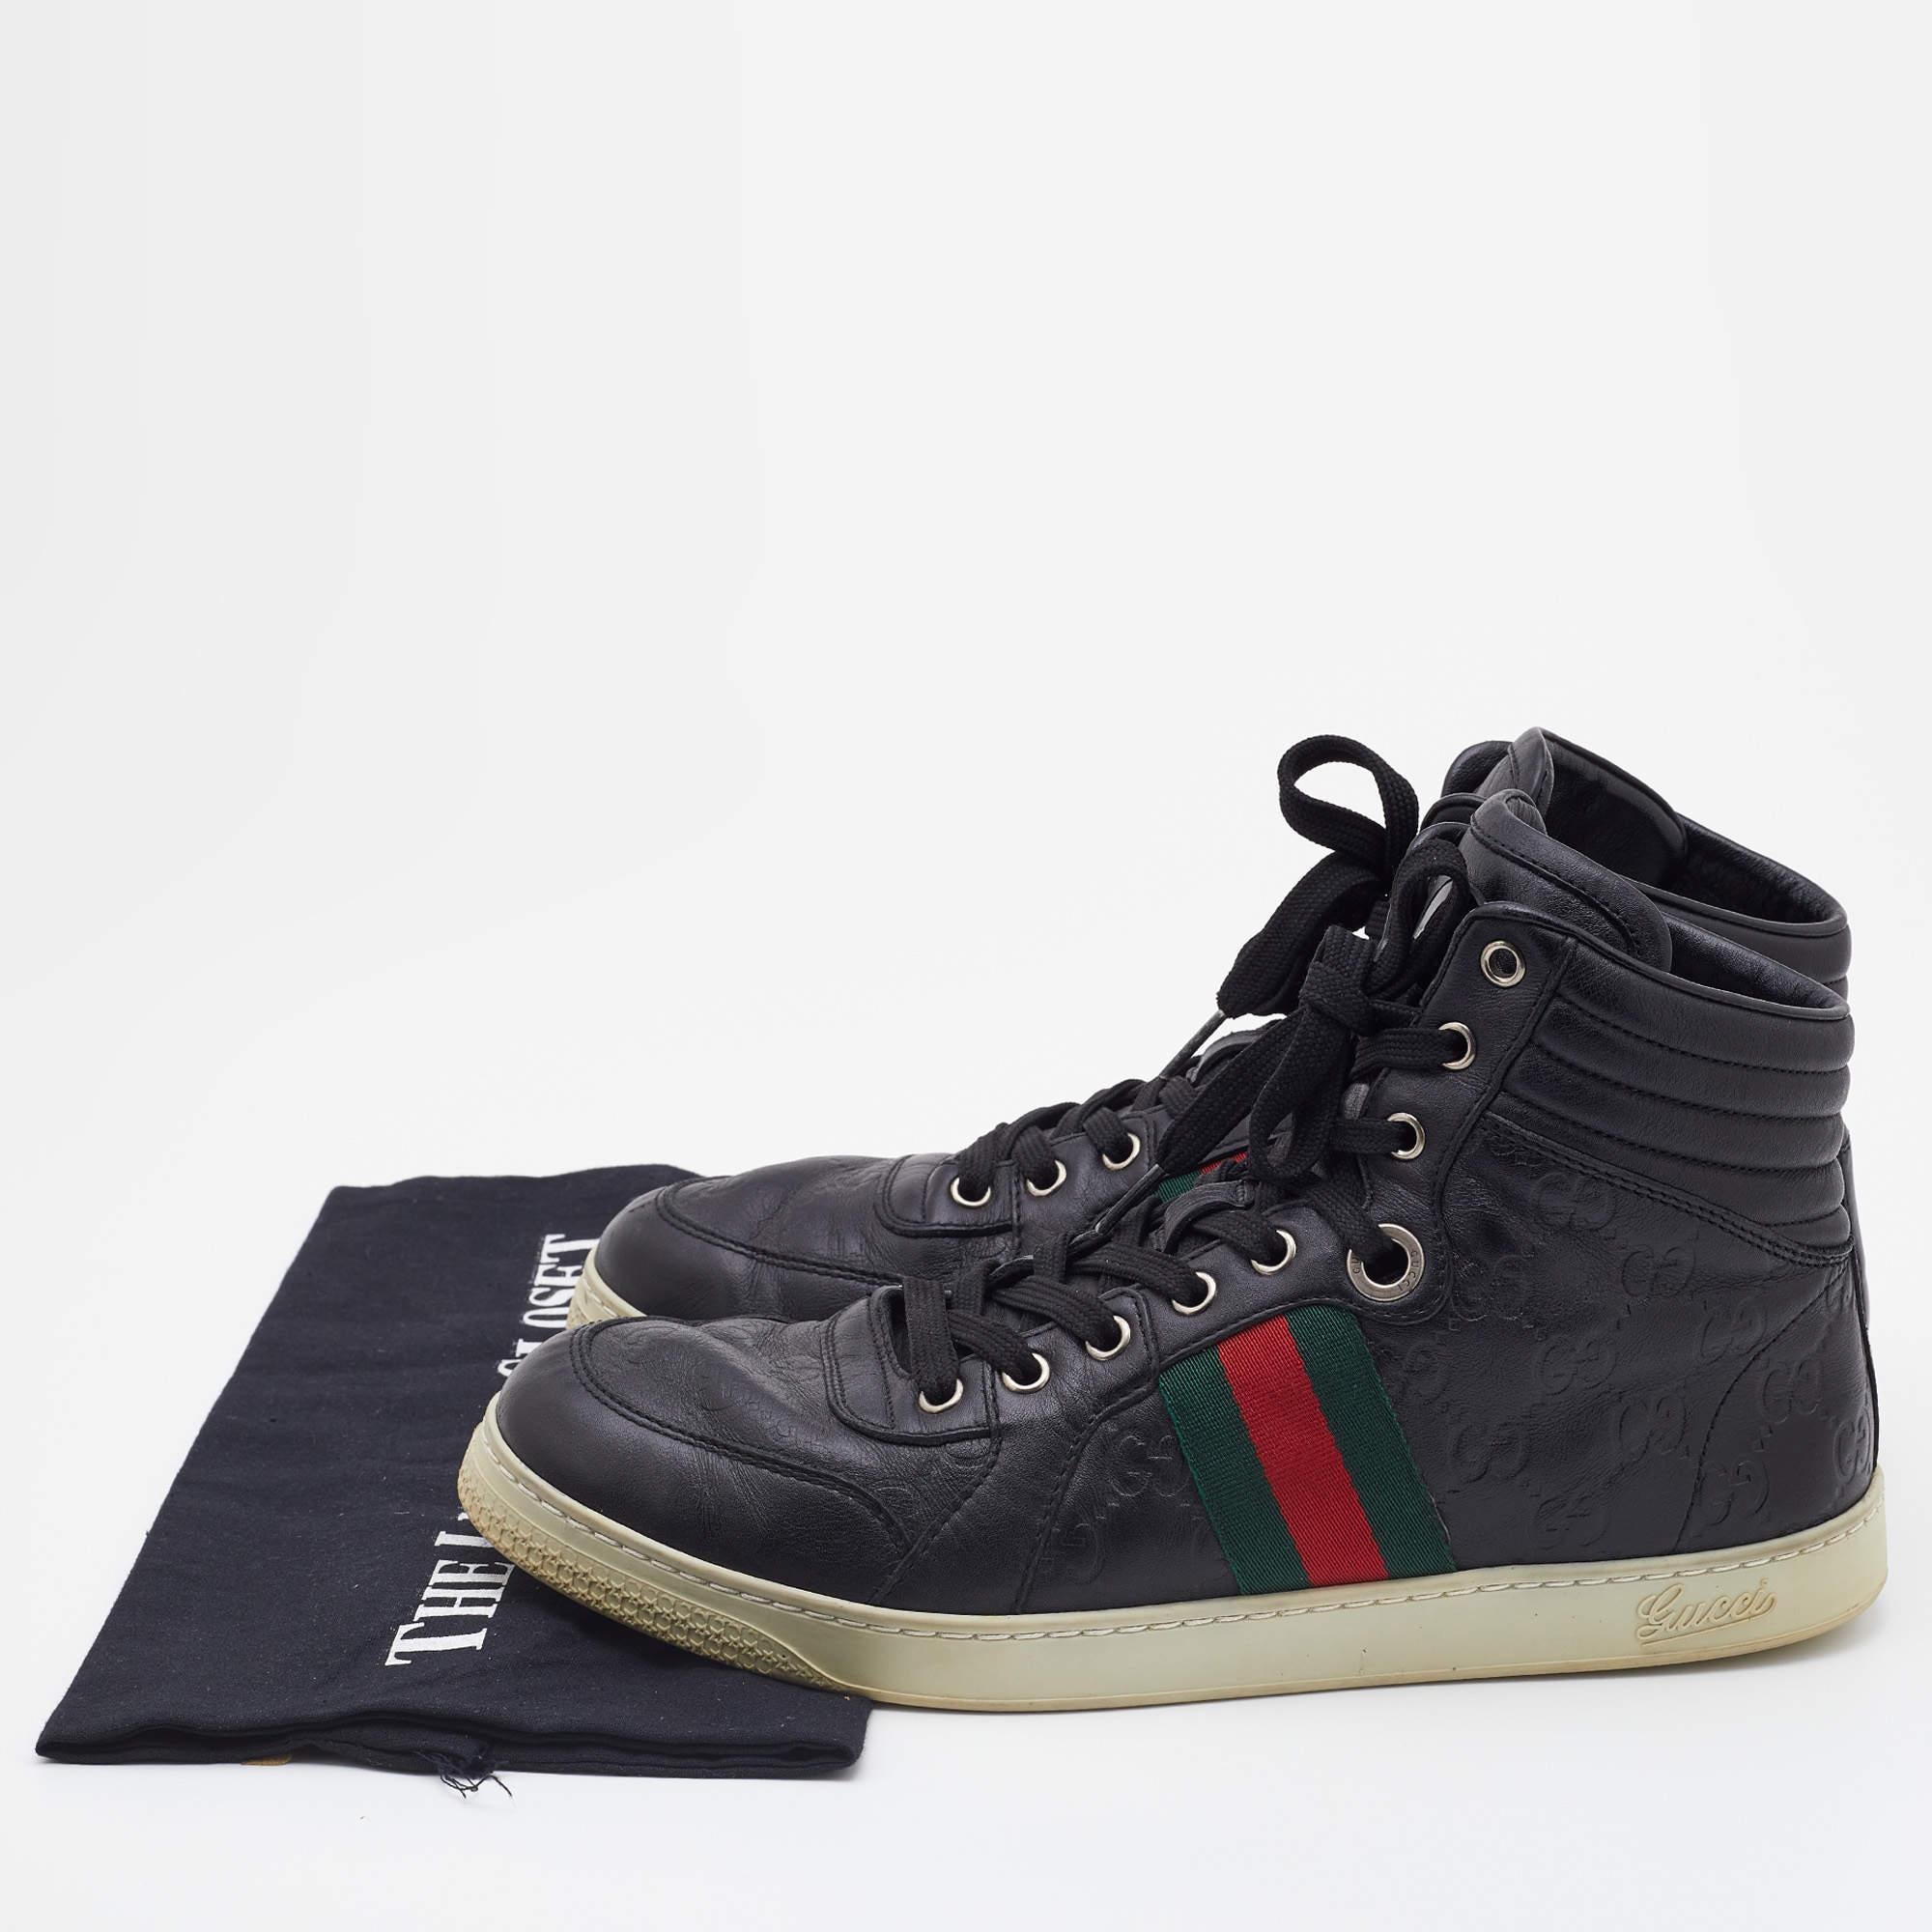 Gucci Black Guccissima Leather Web Detail High Top Sneakers Size 41.5 For Sale 5